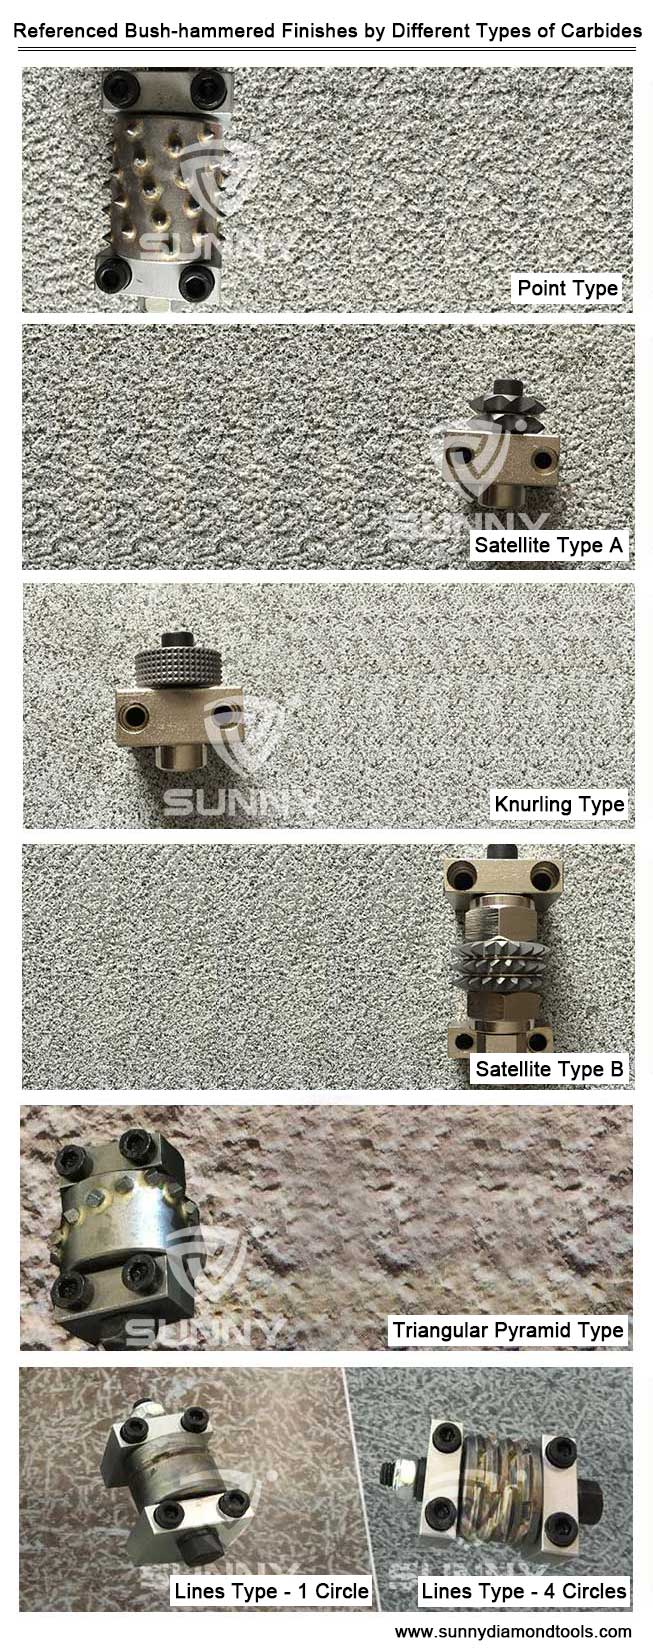 Different Finishes by Different Bush Hammer Rollers